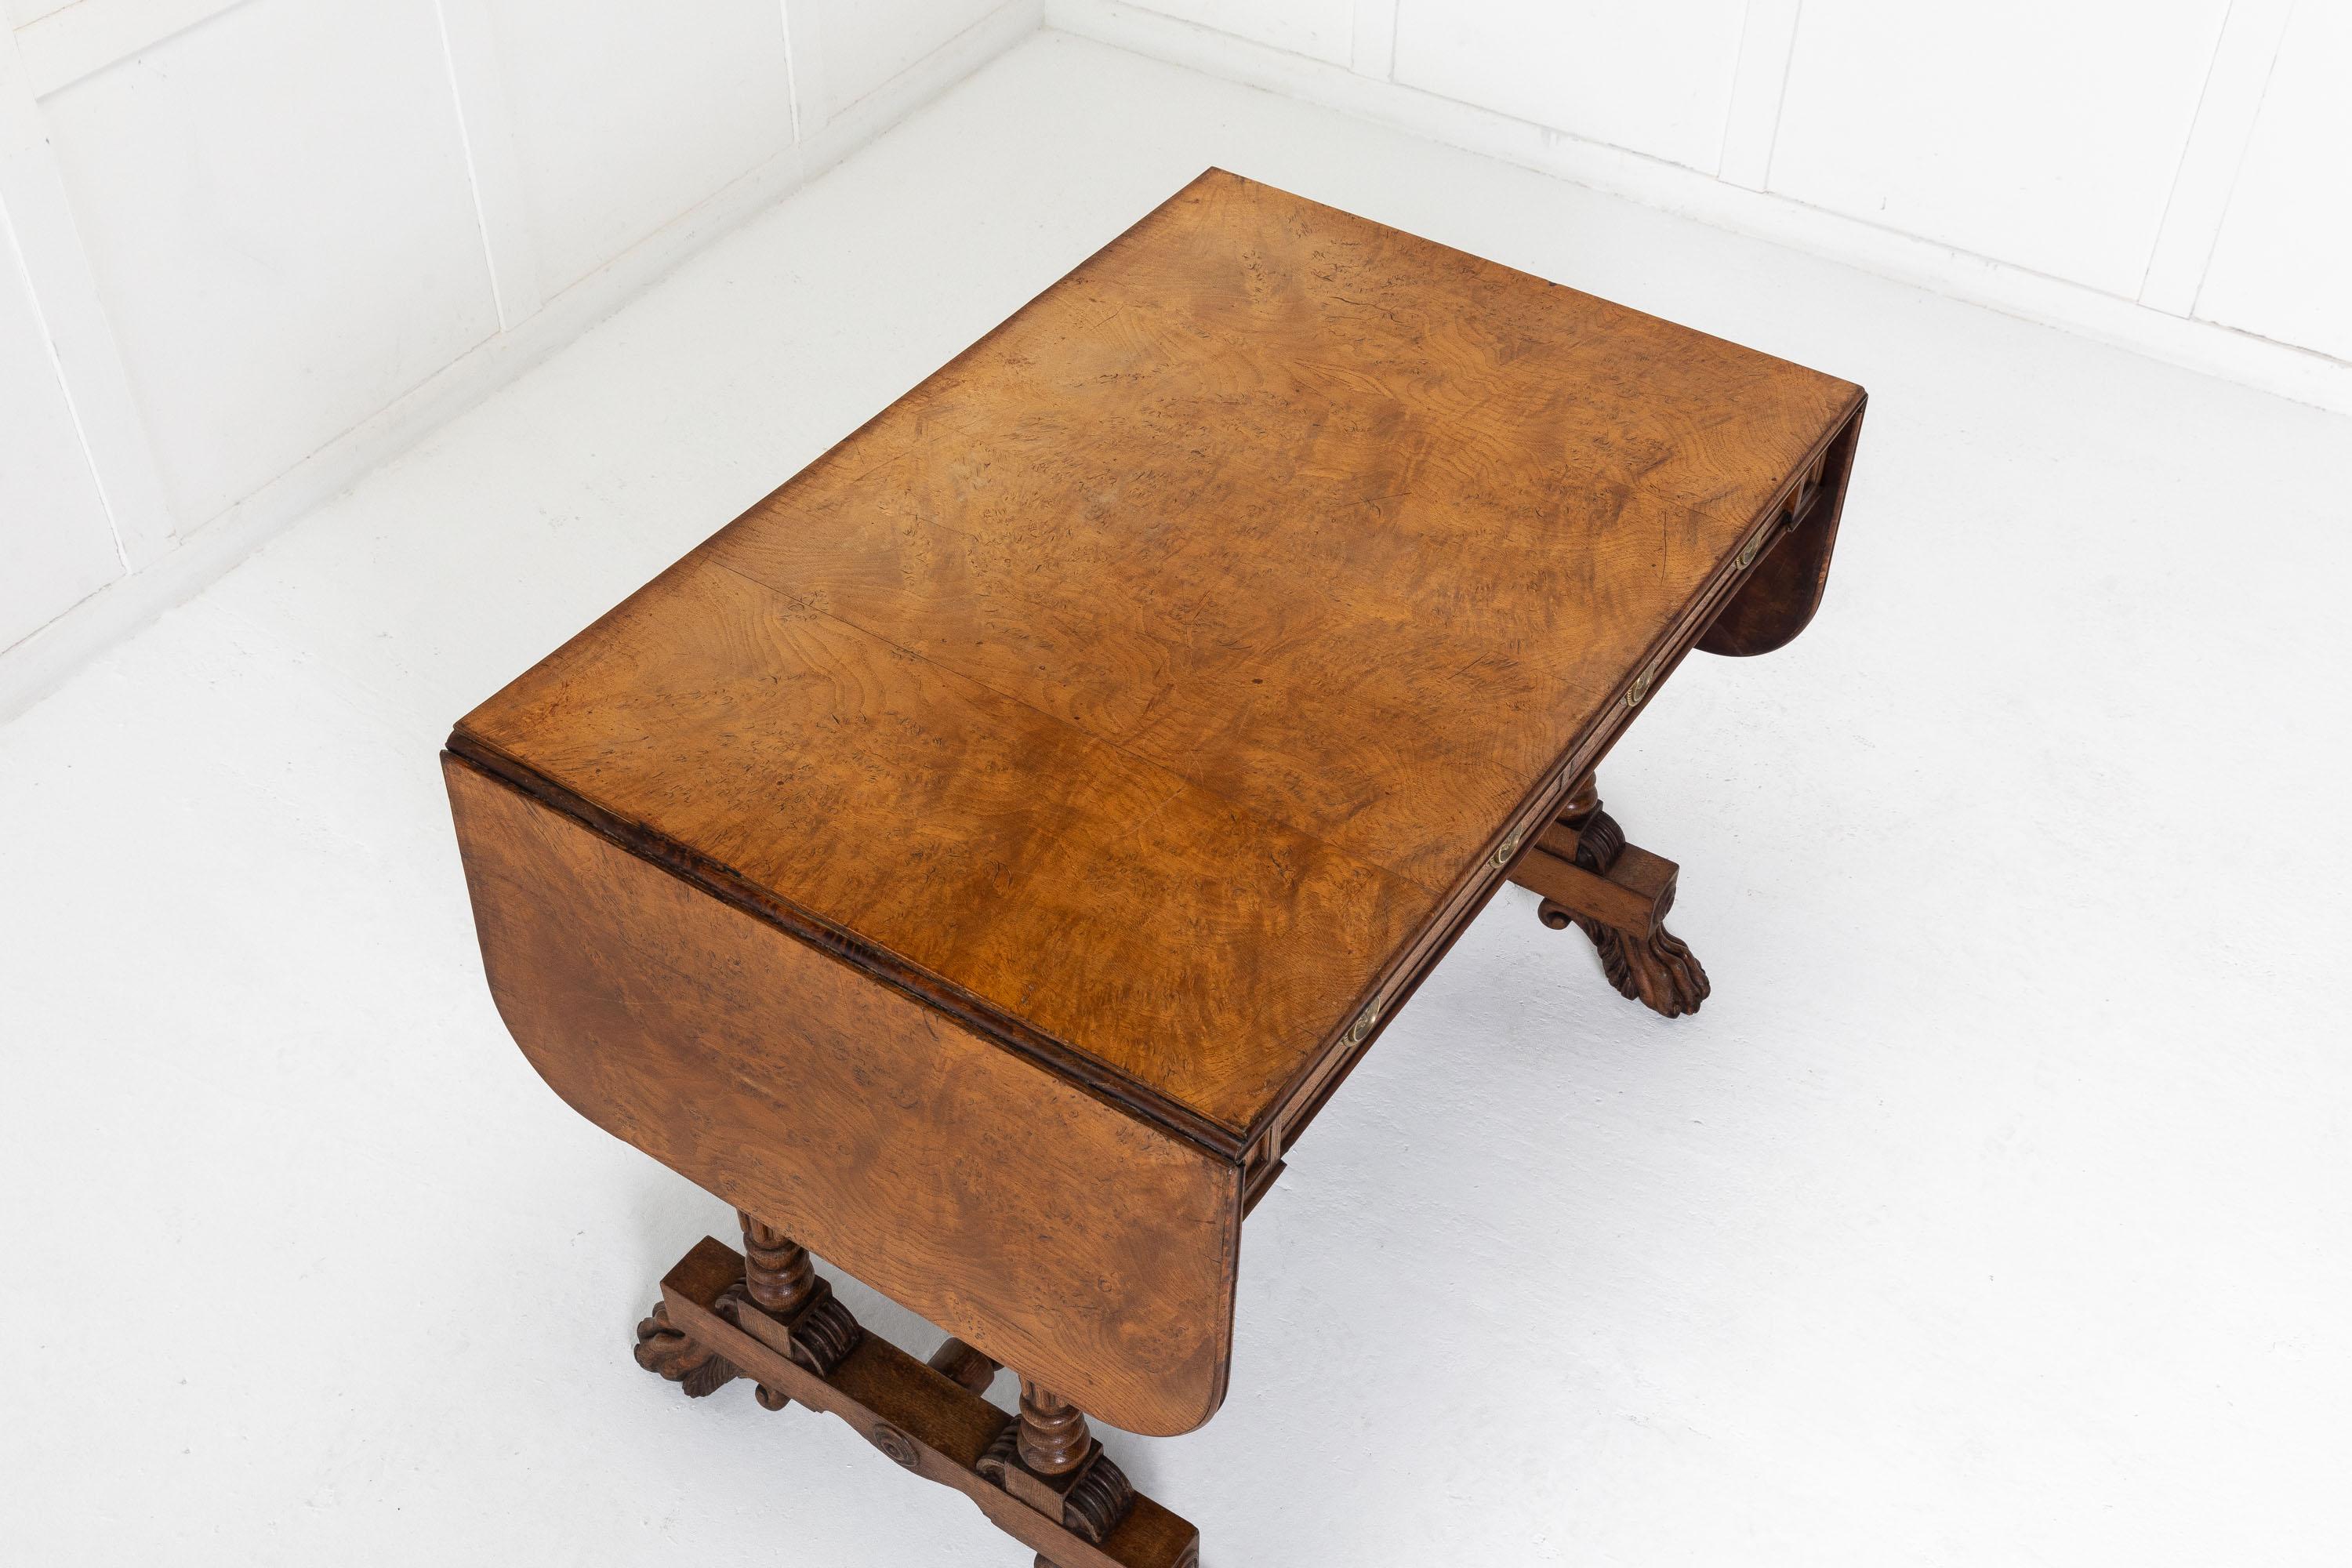 European Important Regency Oak and Burr Elm Sofa Table, 'Attributed to George Bullock' For Sale